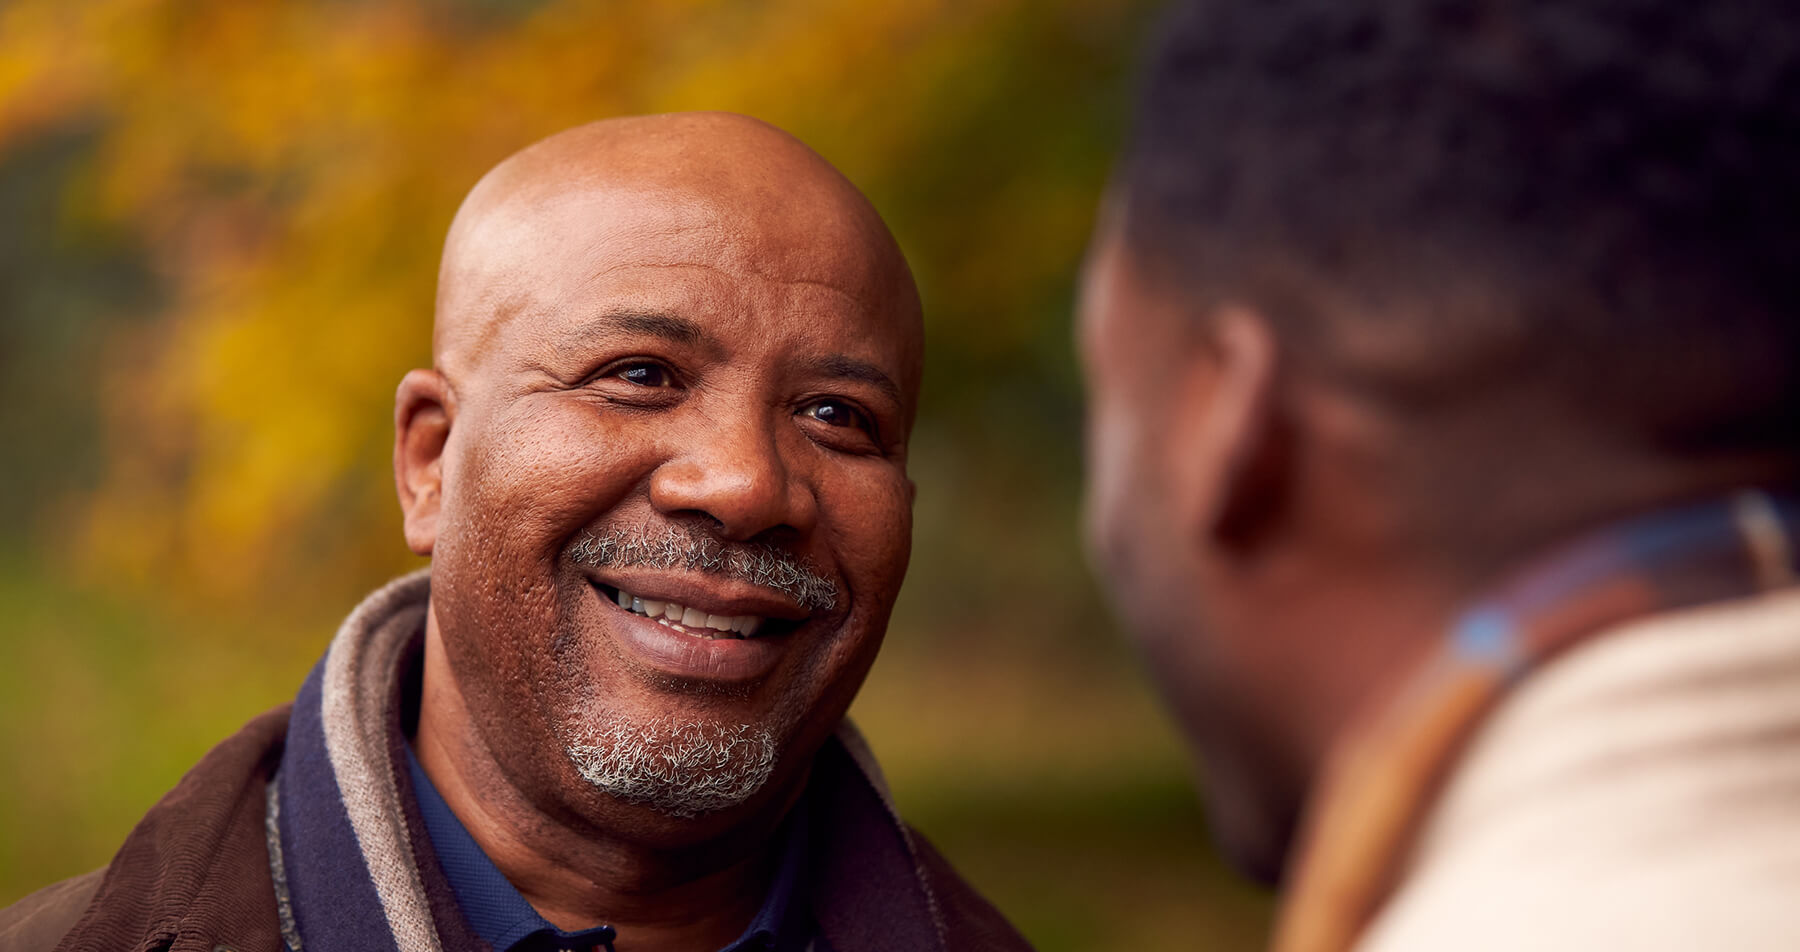 A Black father talking with his adult son, making direct eye contact, a caring smile engaging laugh lines. His son’s partial profile hints at a smile